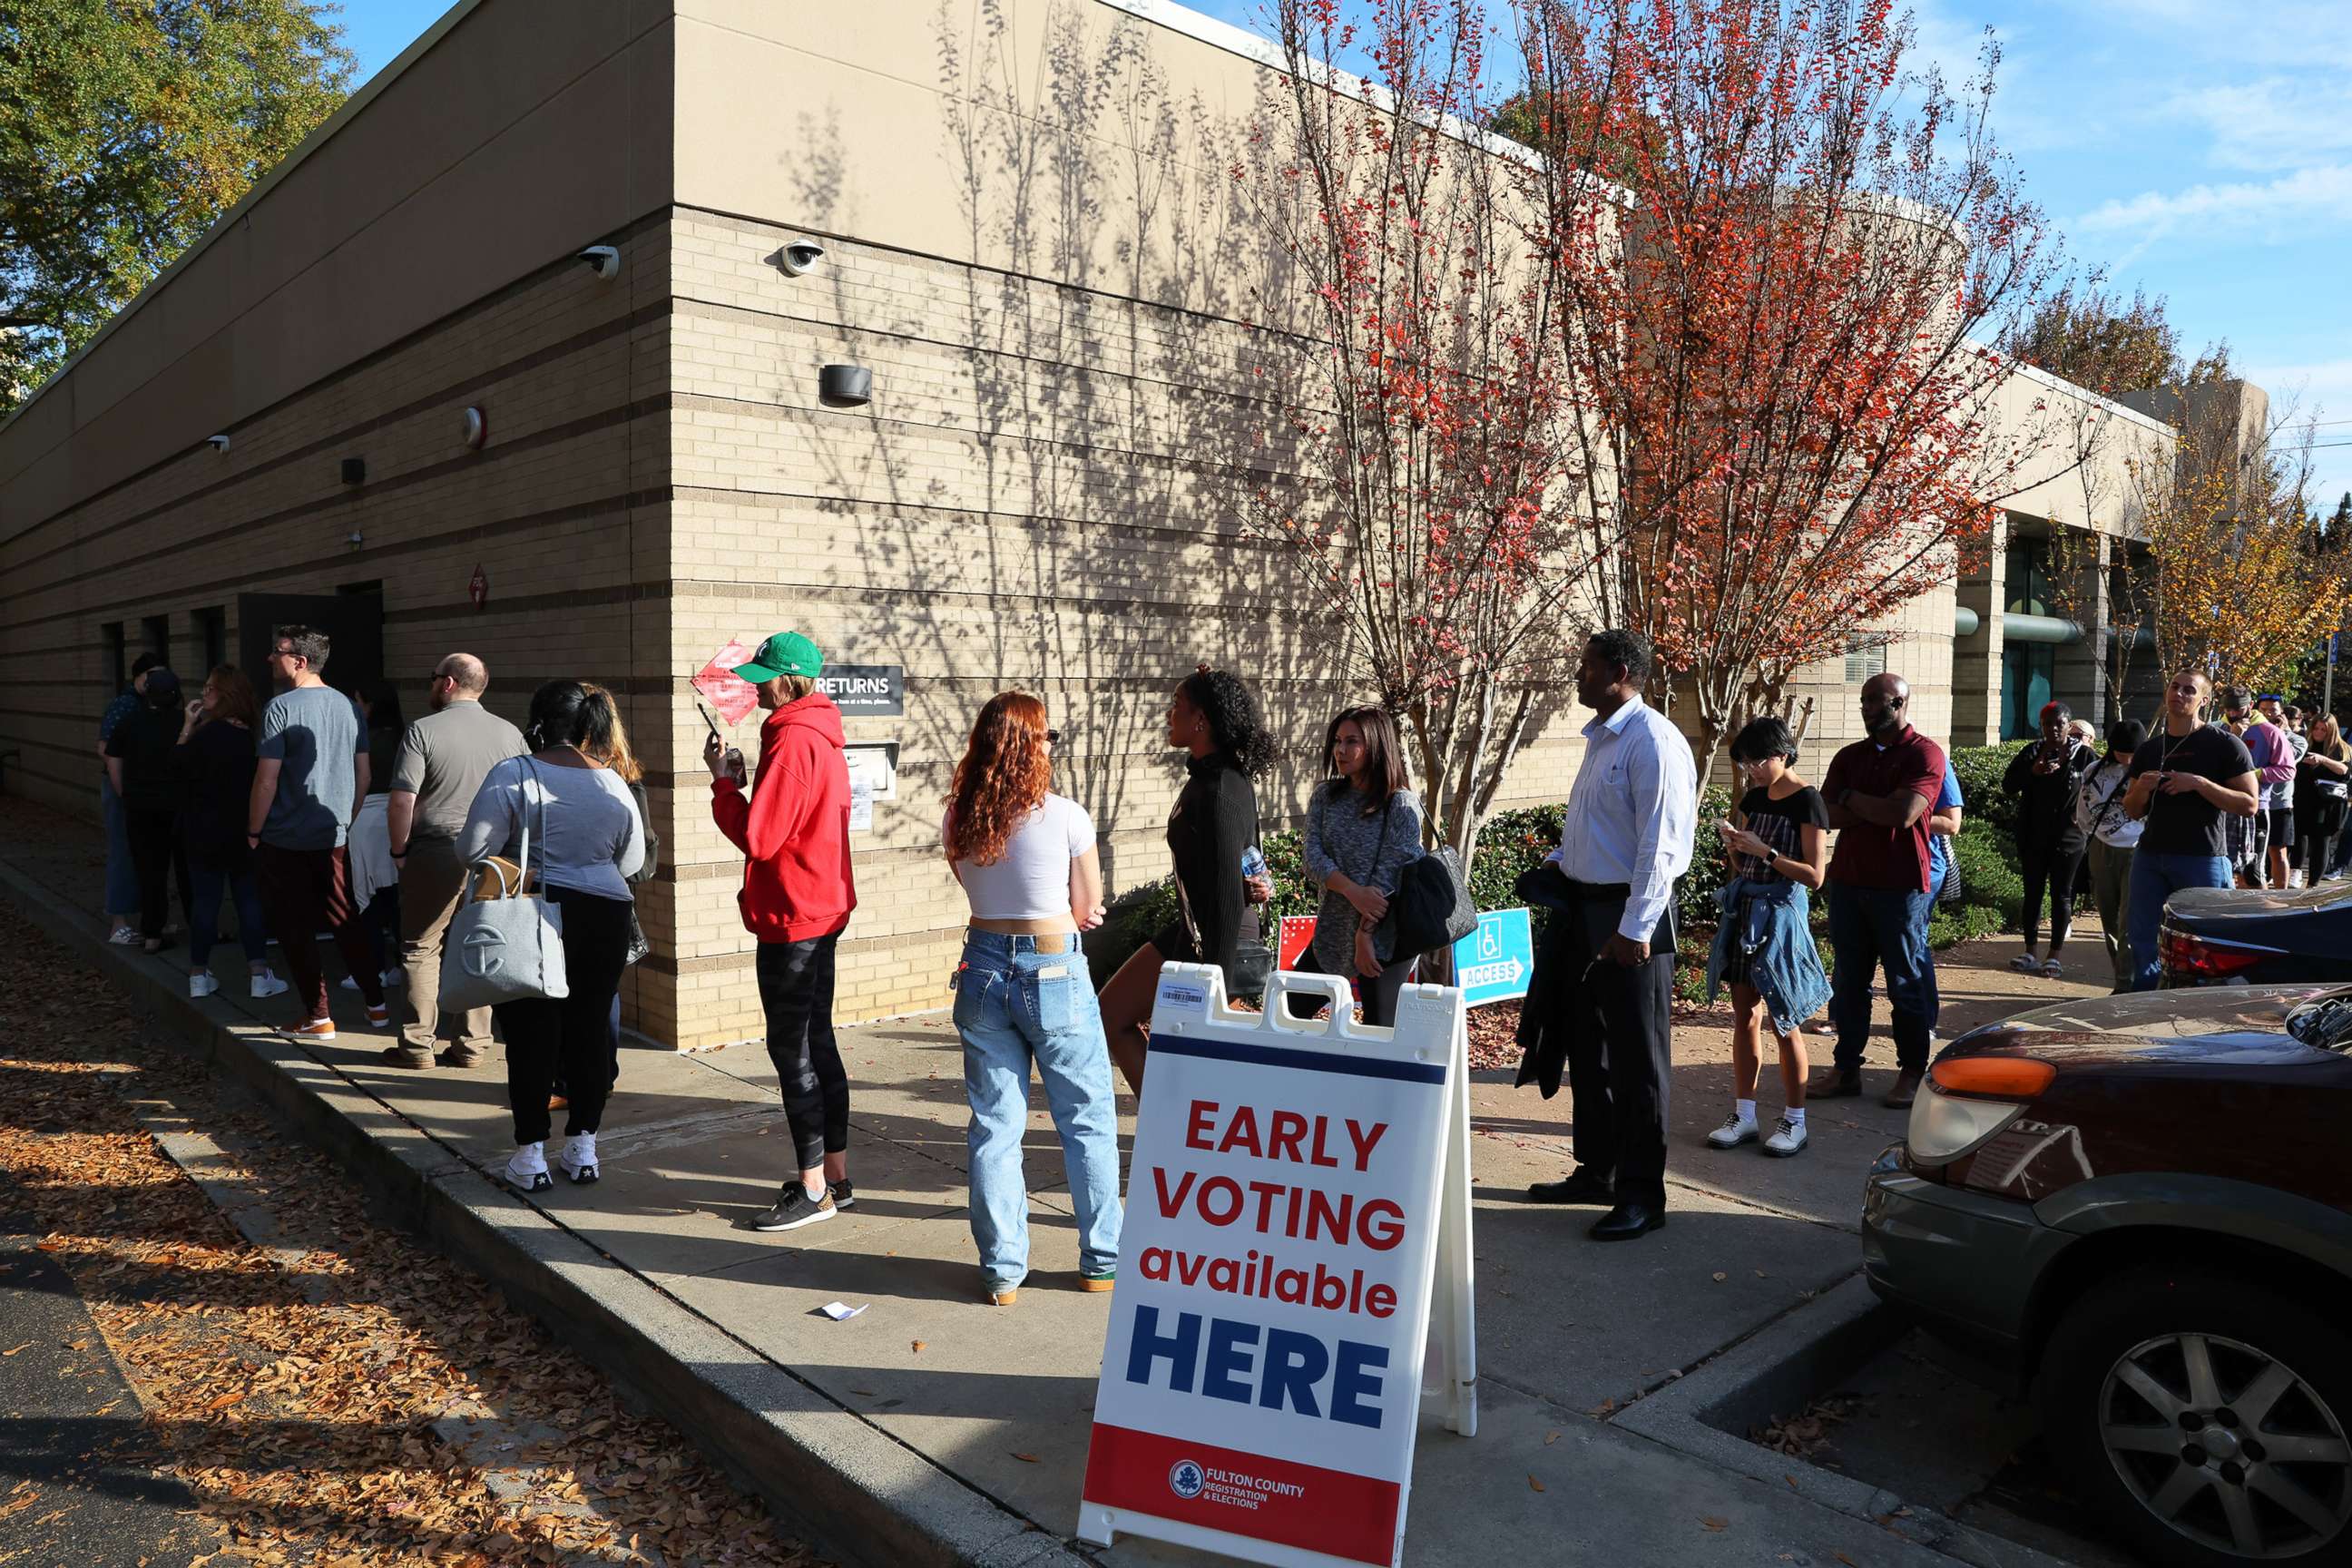 PHOTO: People wait in line for early voting for the midterm elections at Ponce De Leon Library on Nov. 4, 2022, in Atlanta.